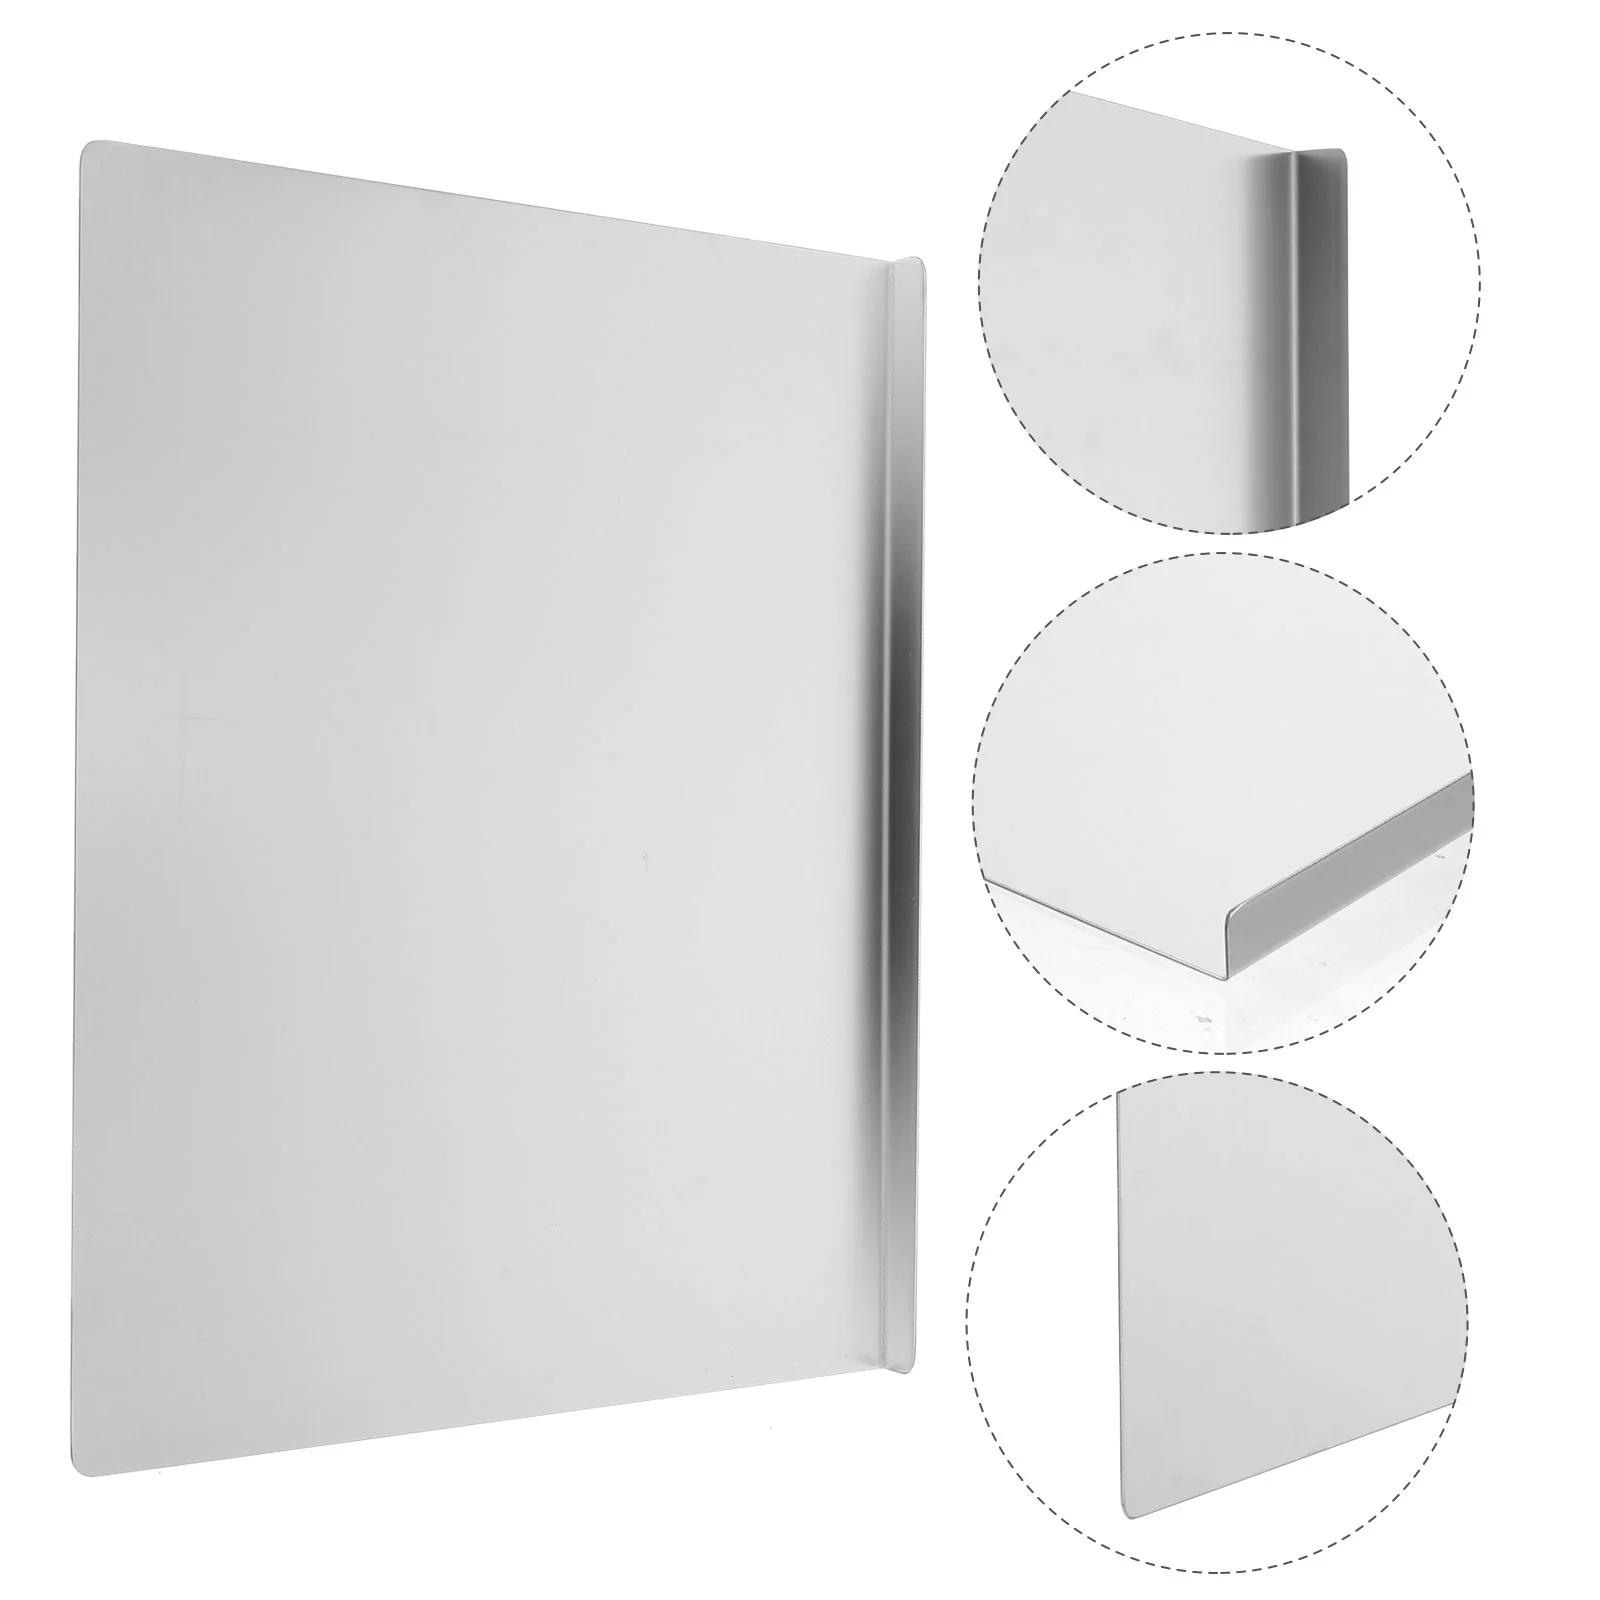 

Stainless Steel Panel Practical Chopping Board Non-stick Kitchen Tool Cutting Boards Environmentally-friendly Pizza